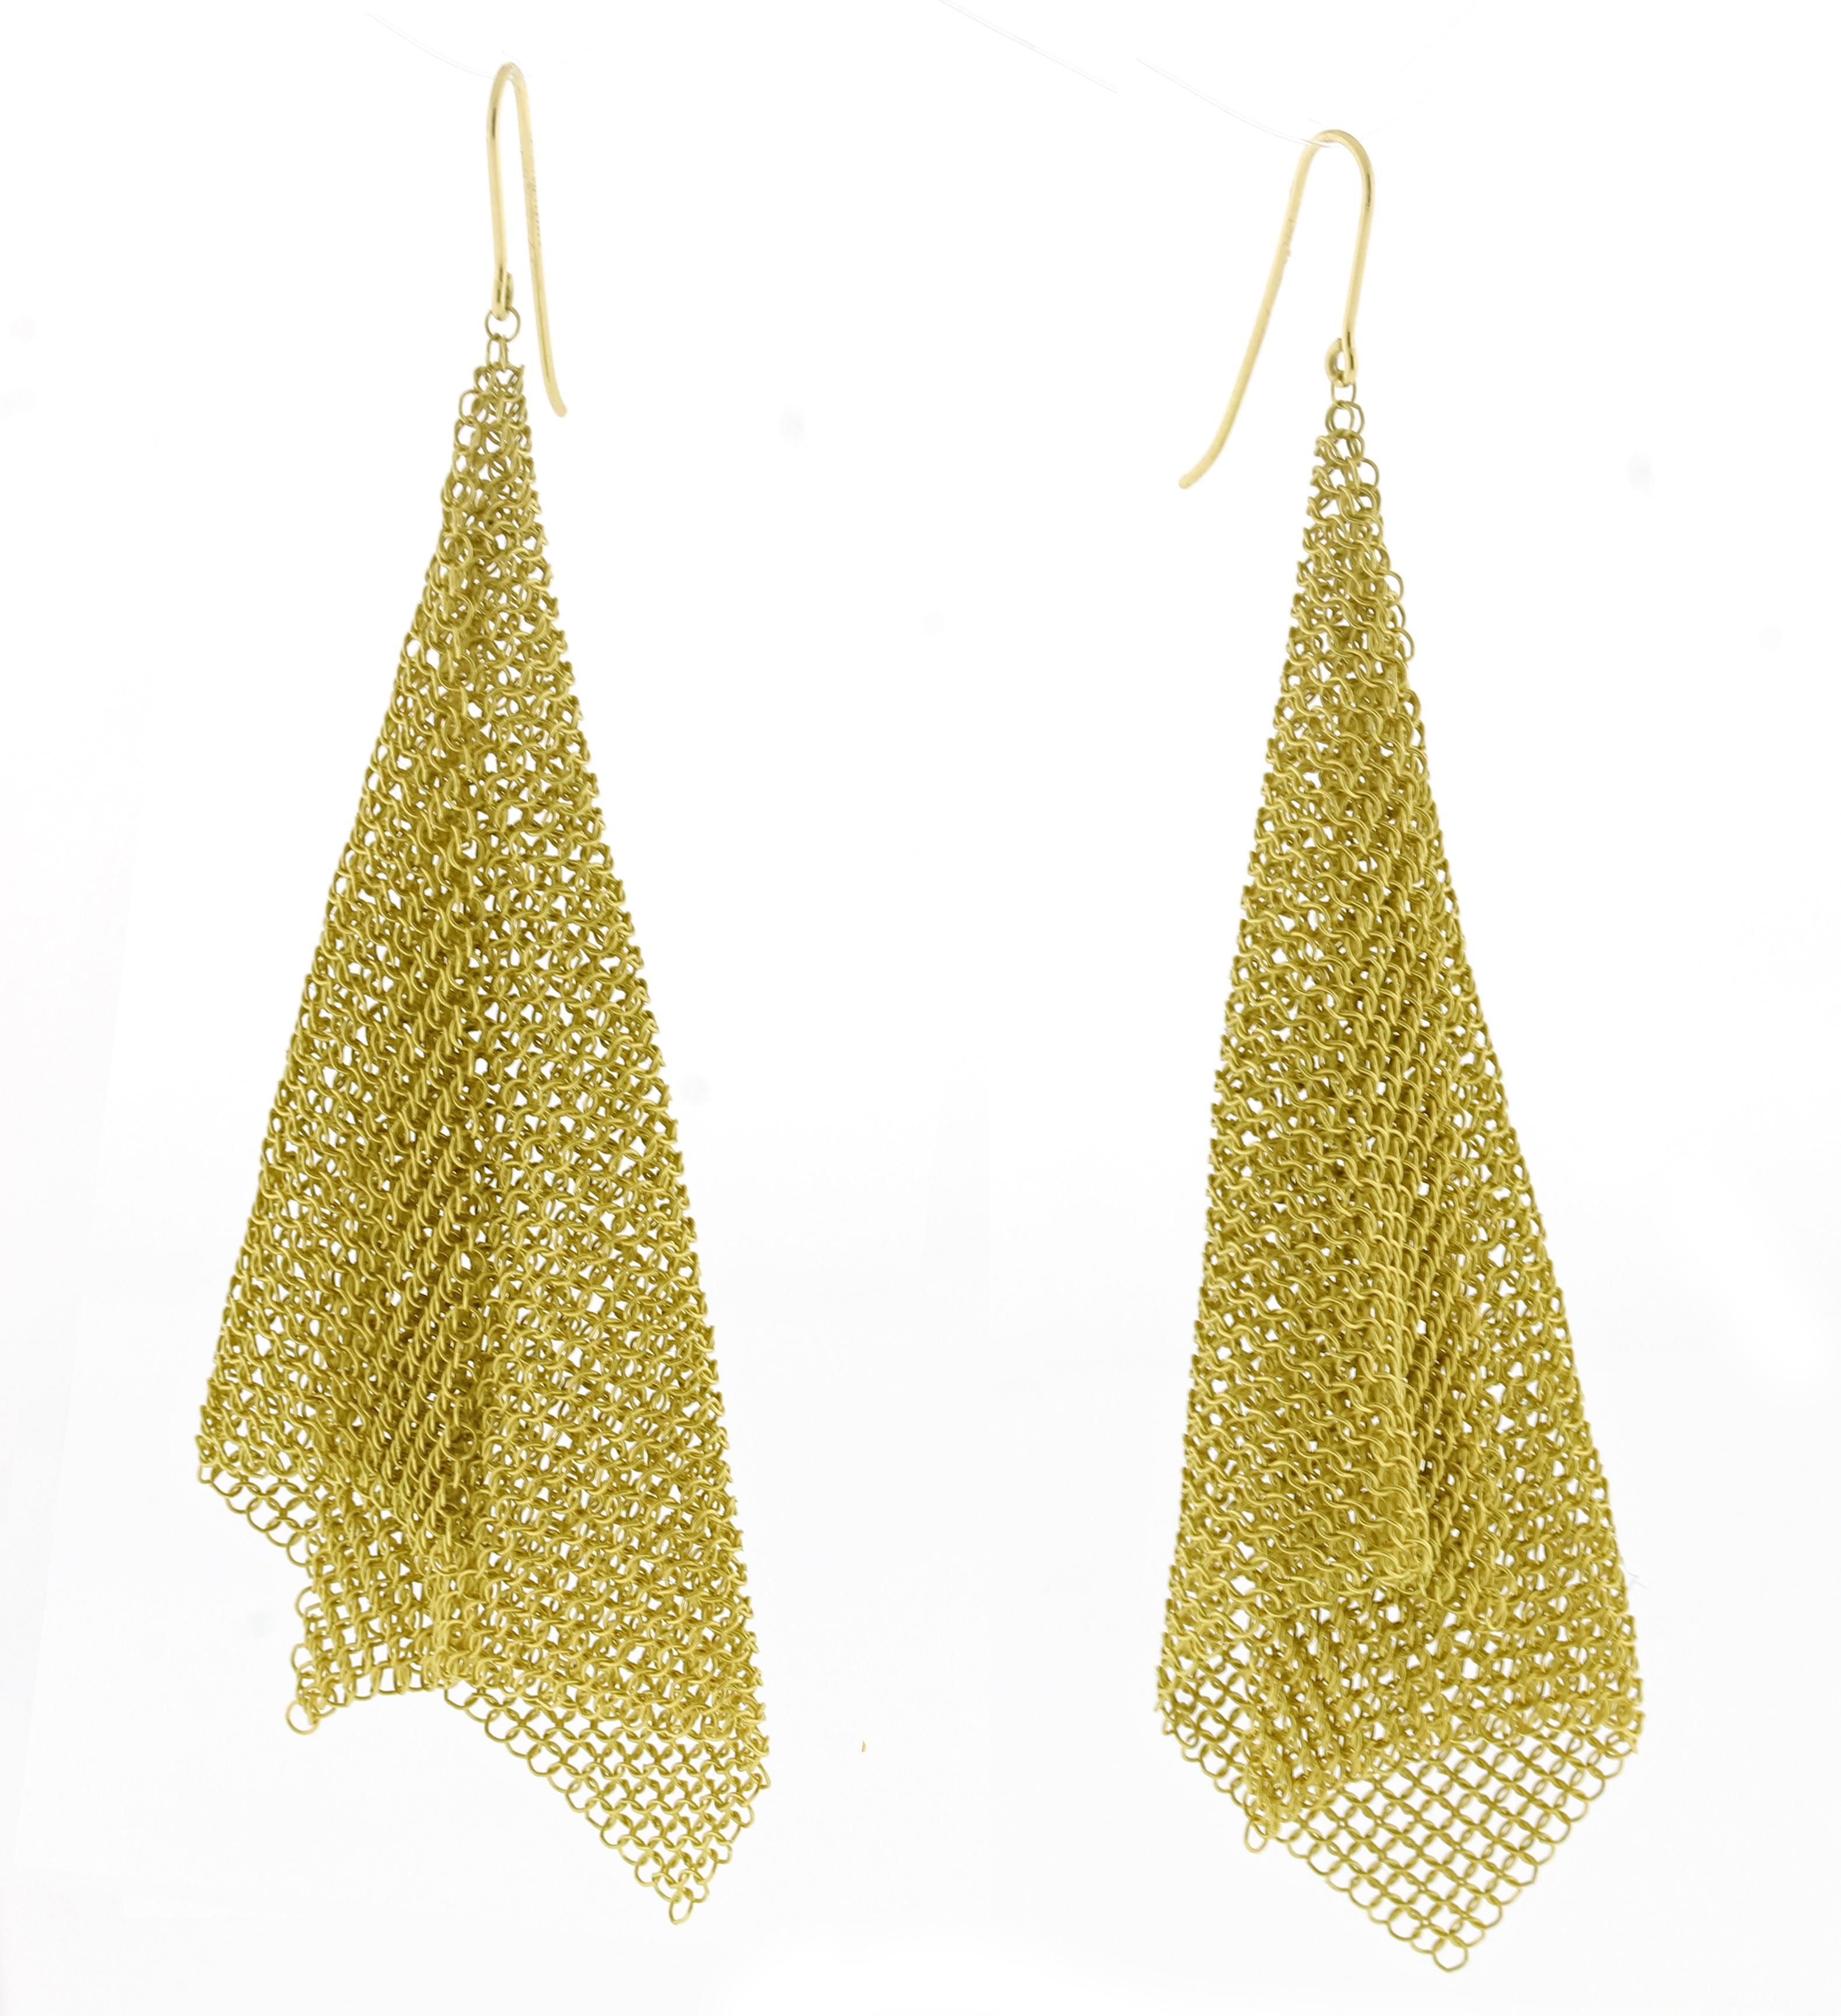  From Elsa Perriti for Tiffany & Co. and pair of 18 mesh drop earrings The form is malleable and ergonomic in the way it drapes over the body's contours. Scarf earrings in 18 karat gold, 3.5